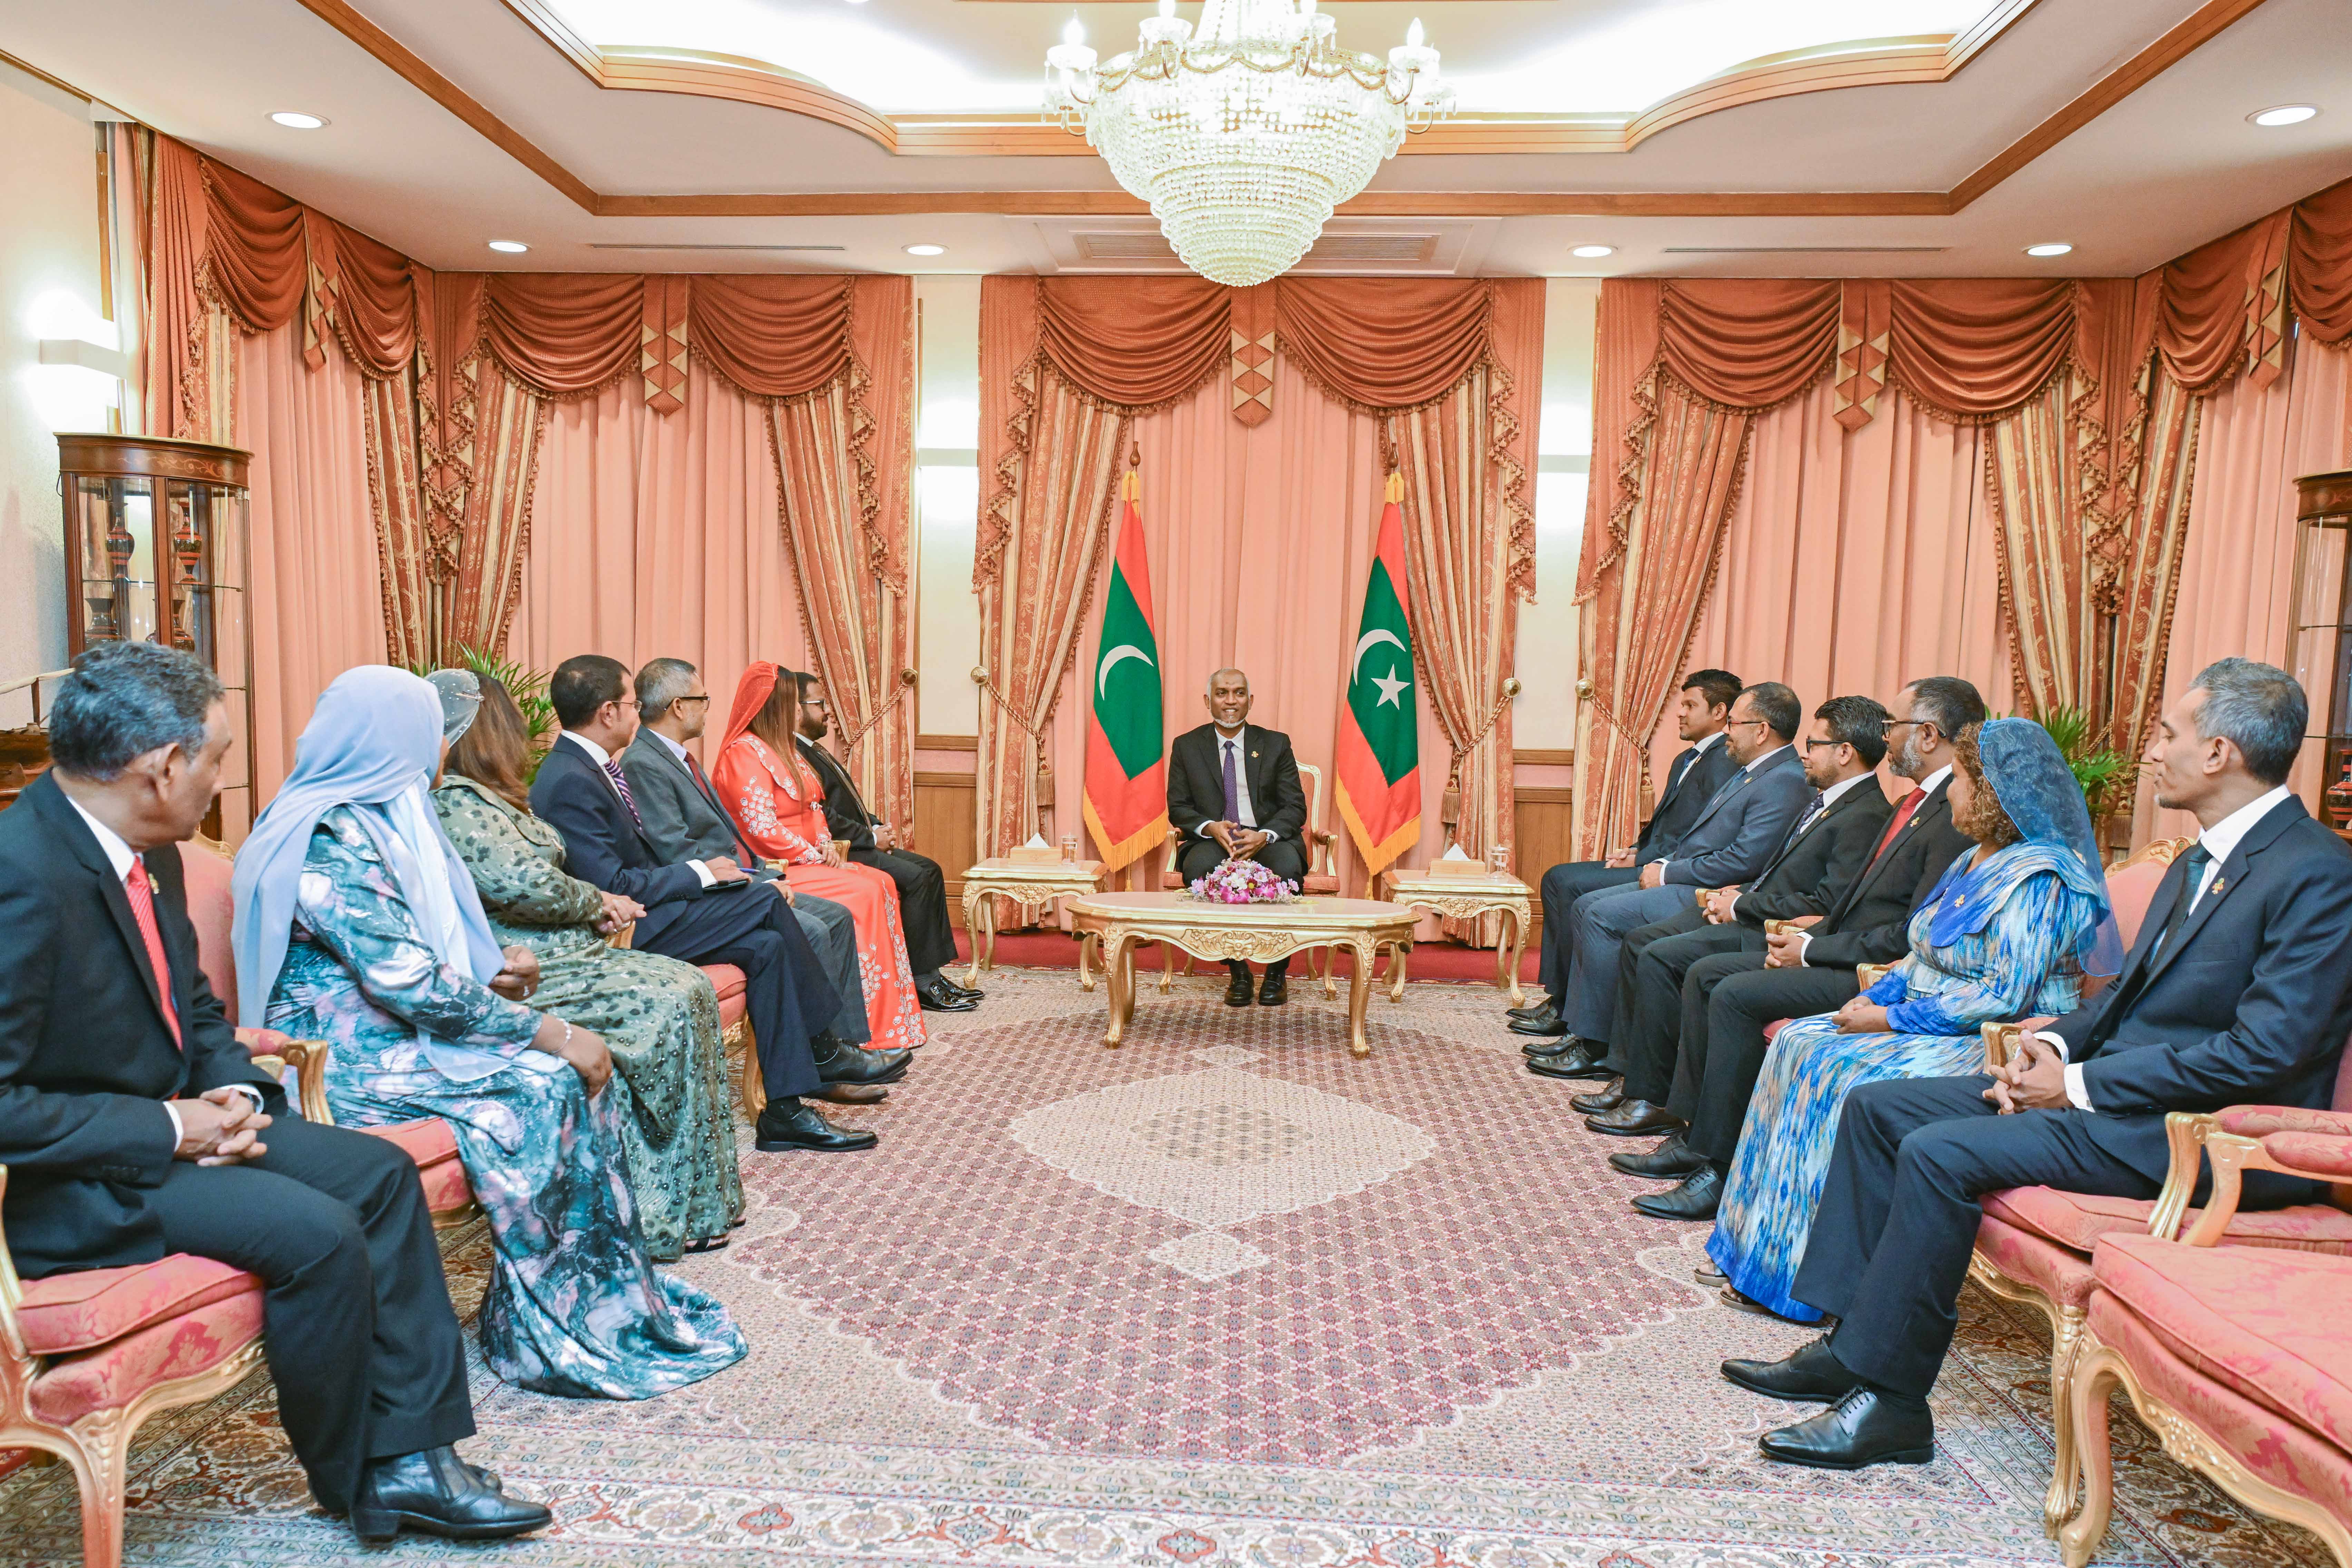 President appoints Ambassadors and High Commissioners to key foreign posts